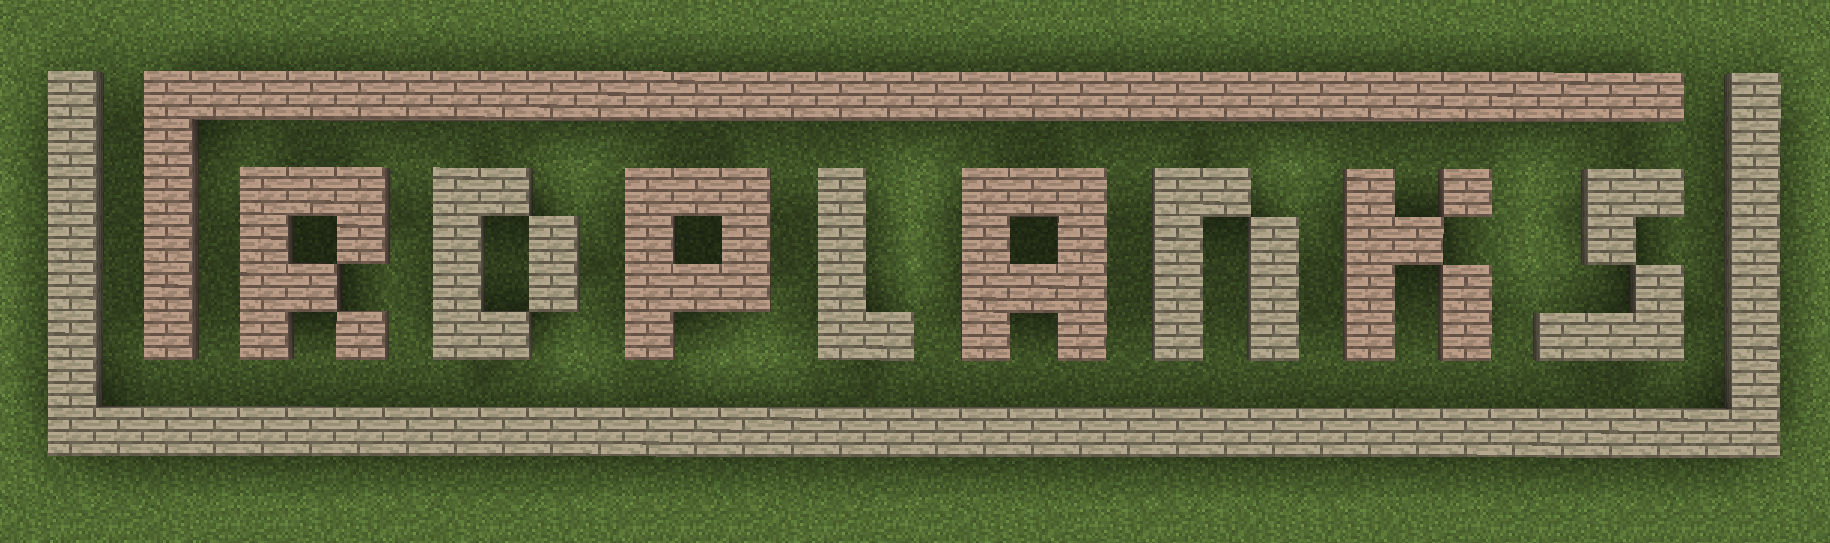 RDPlanks logo made out of the changed planks.